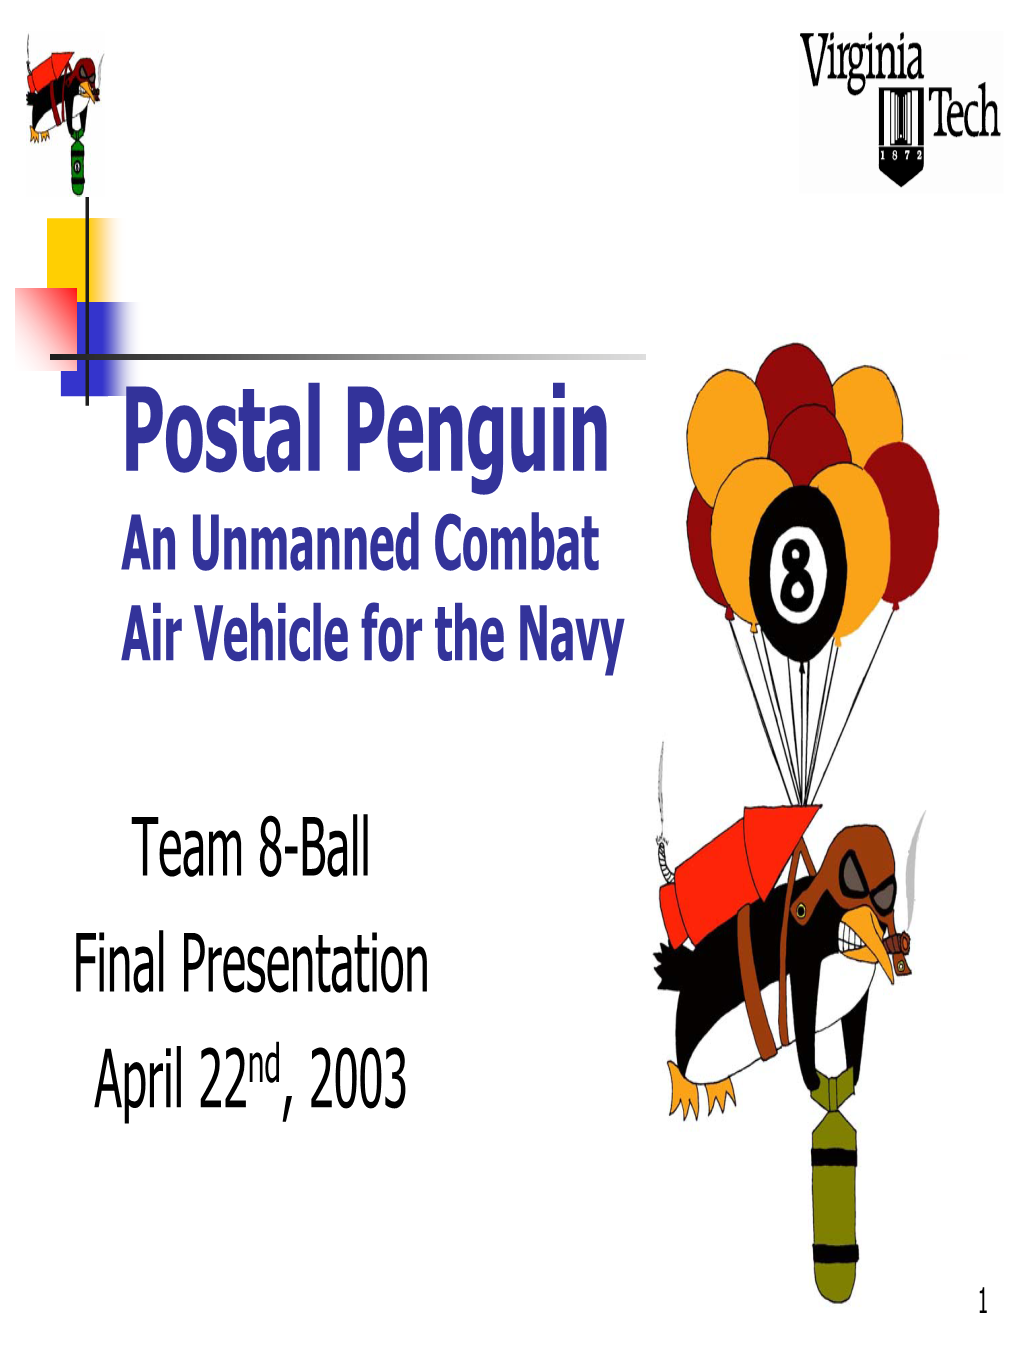 Postal Penguin an Unmanned Combat Air Vehicle for the Navy